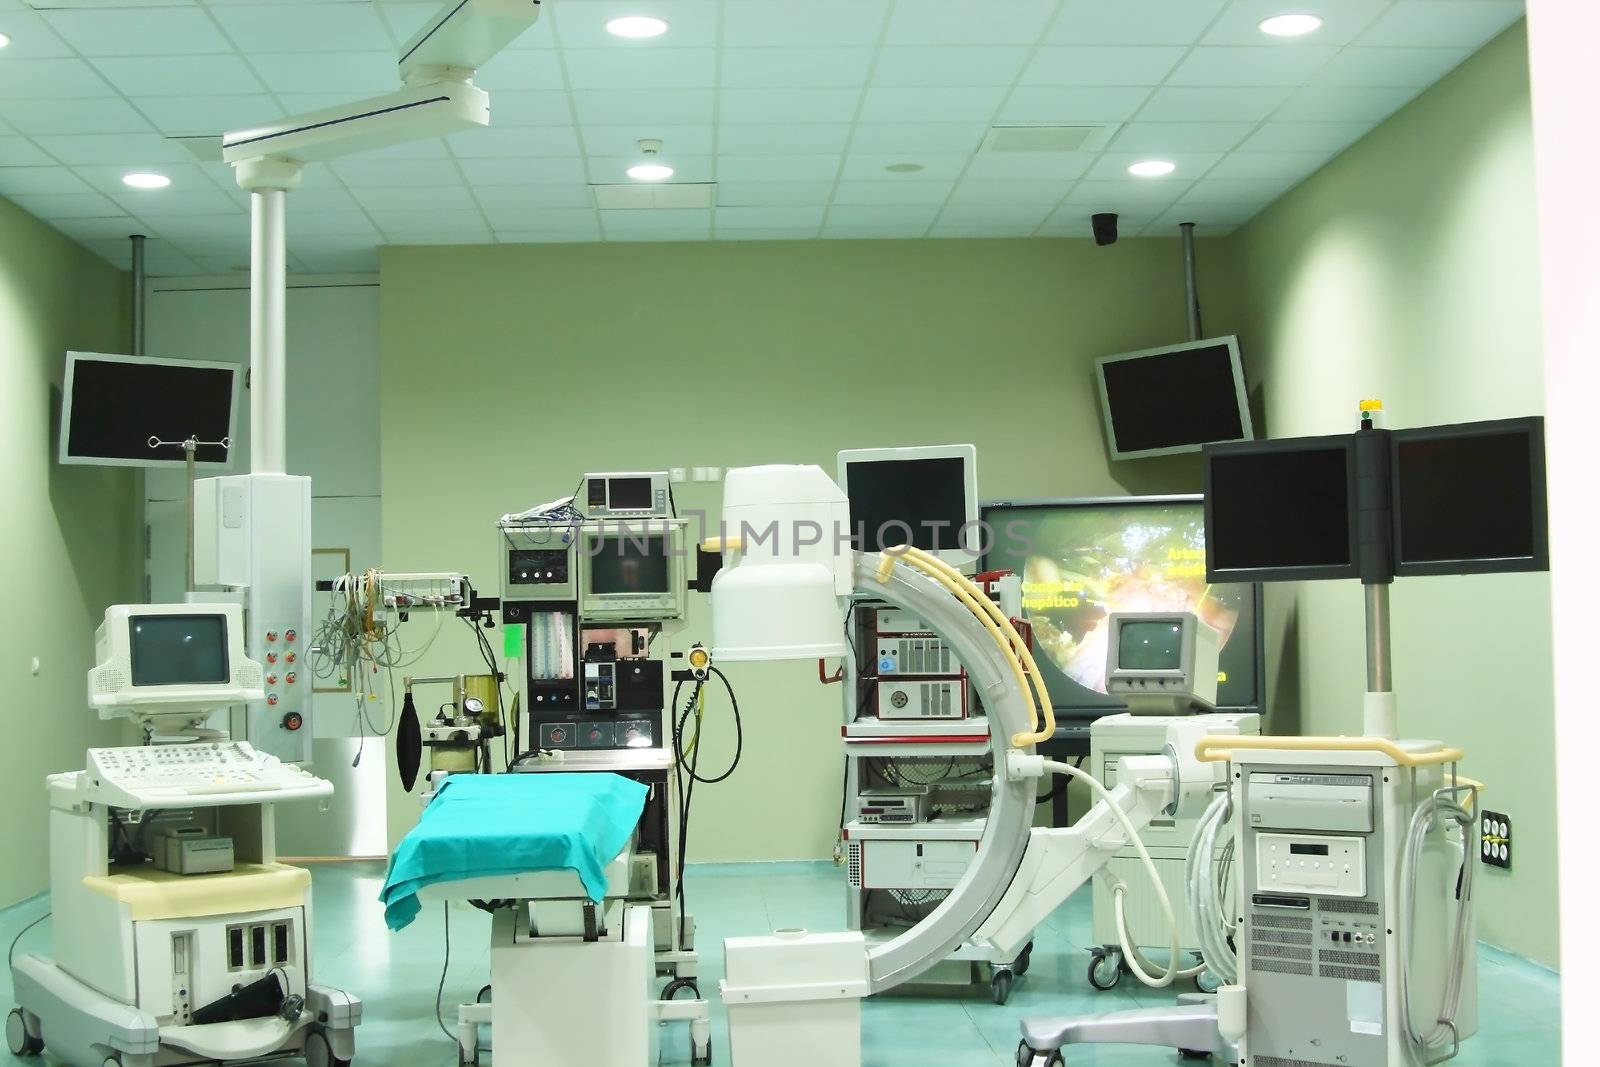 modern operating theater for the investigation of new techniques of minimally invasive surgery